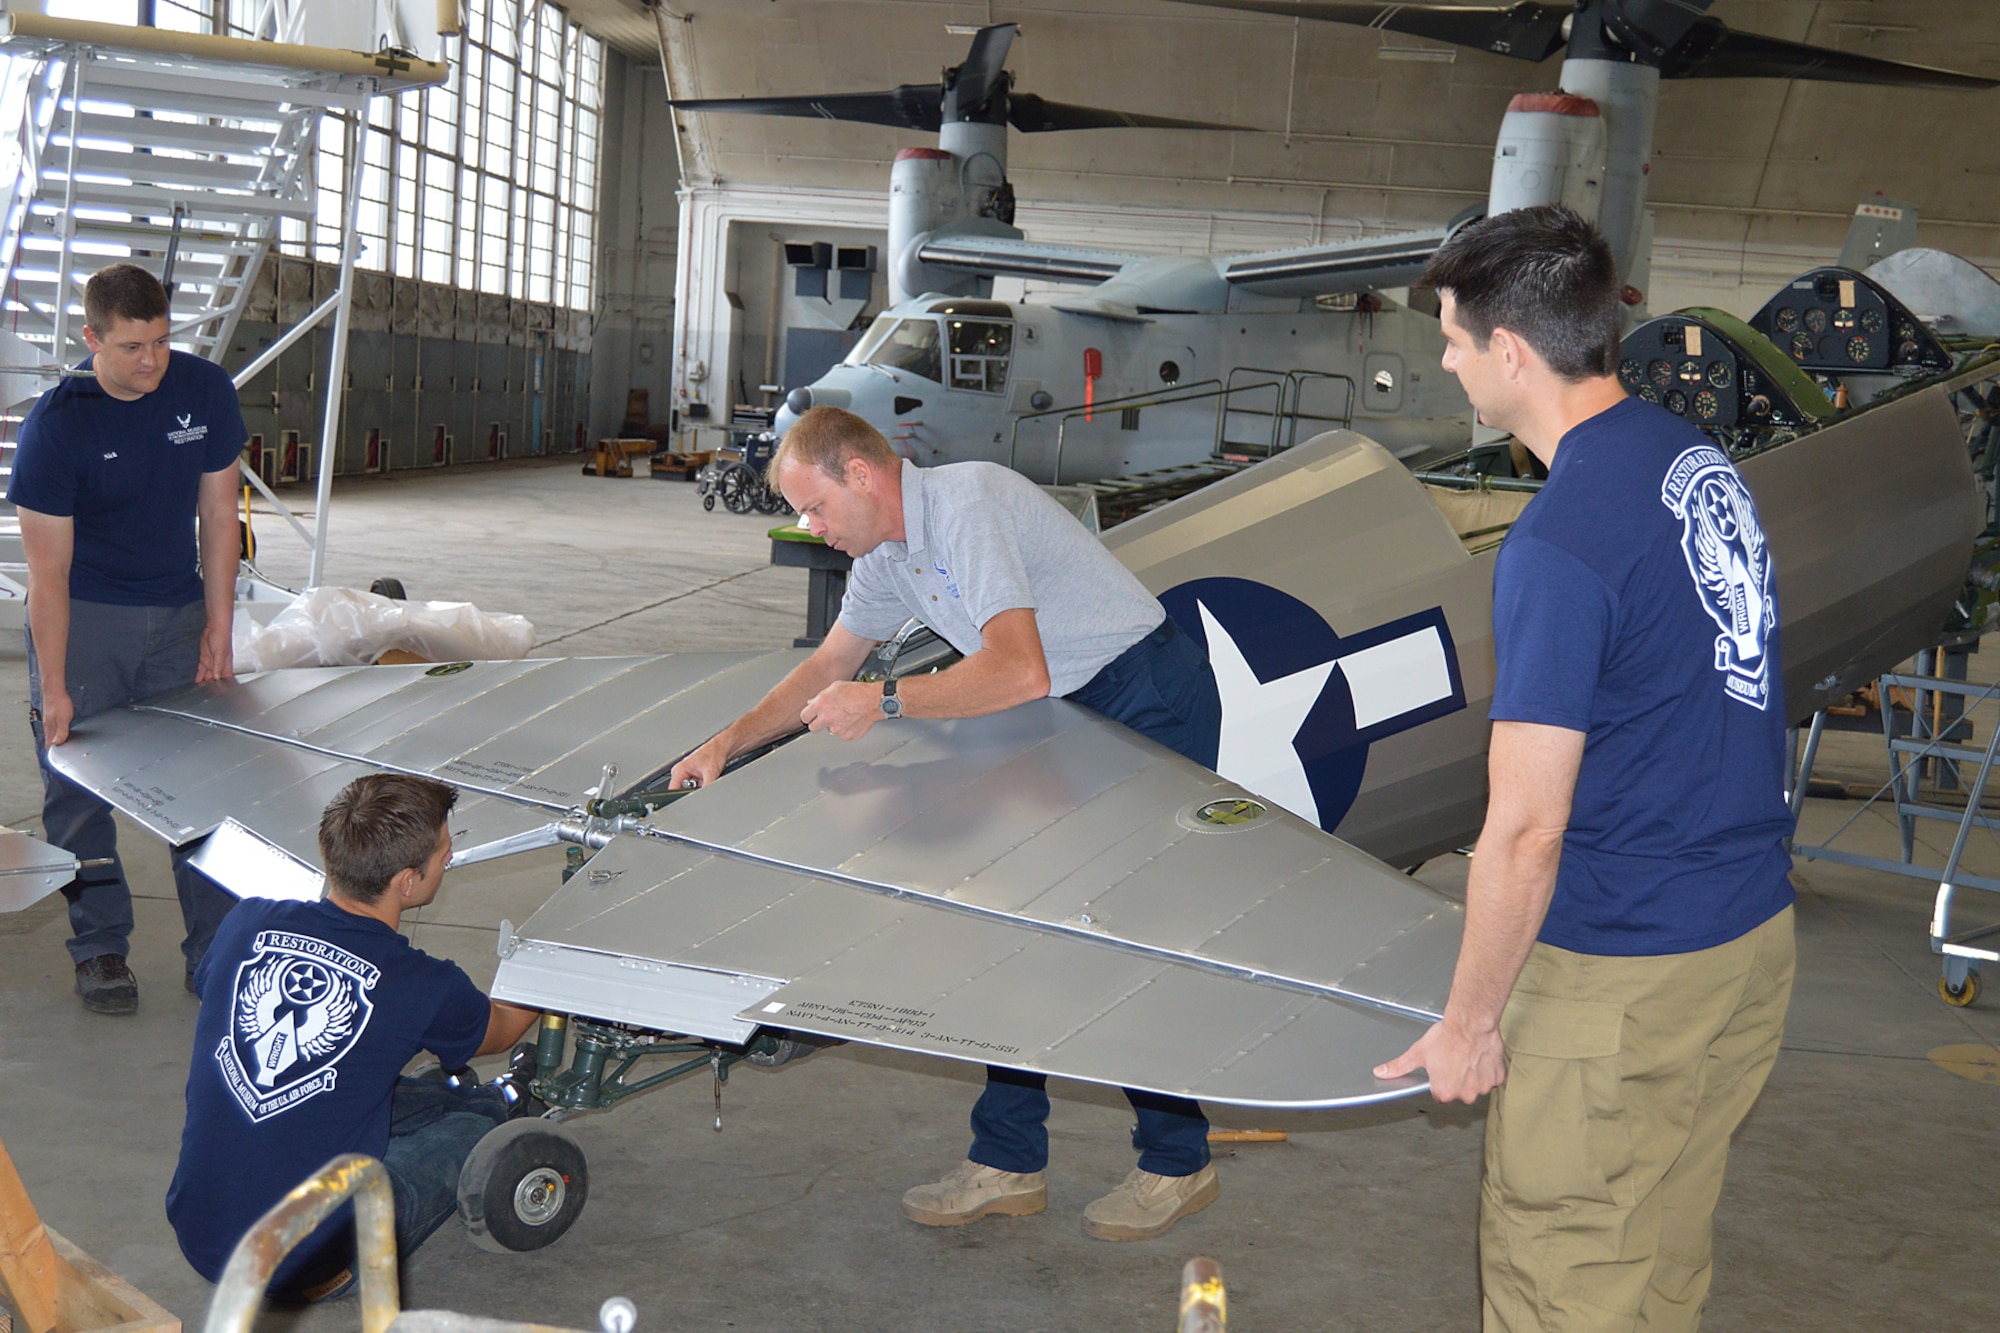 DAYTON, Ohio (06/2014) -- National Museum of the U.S. Air Force Restoration Specialists assemble the tail section of the Stearman PT-13D Kaydet. Plans call for the aircraft to be part of an expanded Tuskegee Airman exhibit in the World War II Gallery at the National Museum of the U.S. Air Force. (U.S. Air Force photo by Ken LaRock)